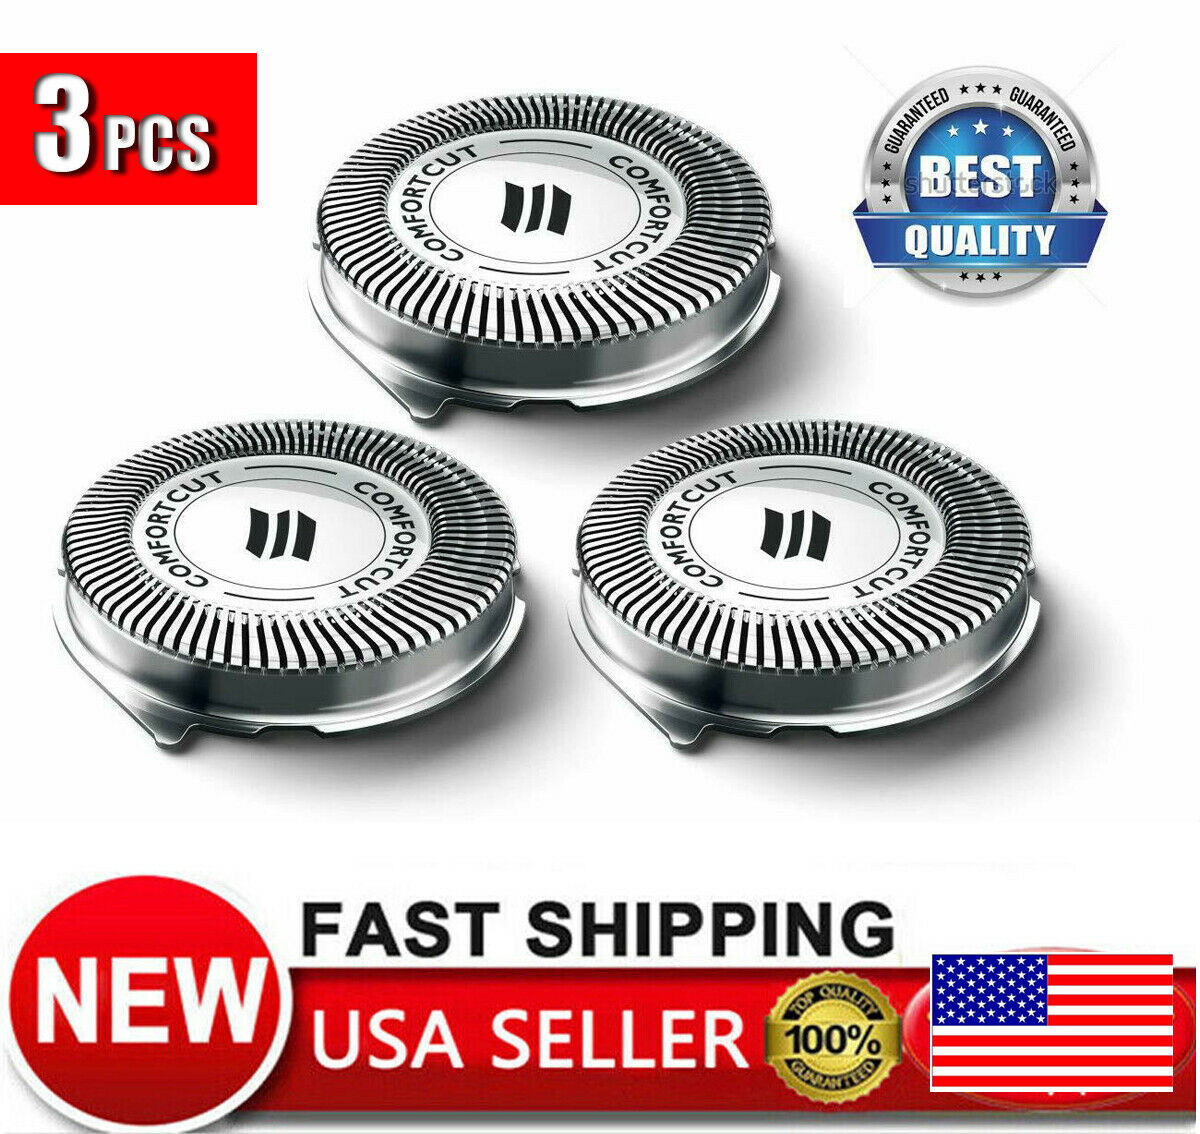 Sh30/52 Replacement Heads For Philips Norelco Series 3000 S738h Sh30 Blades